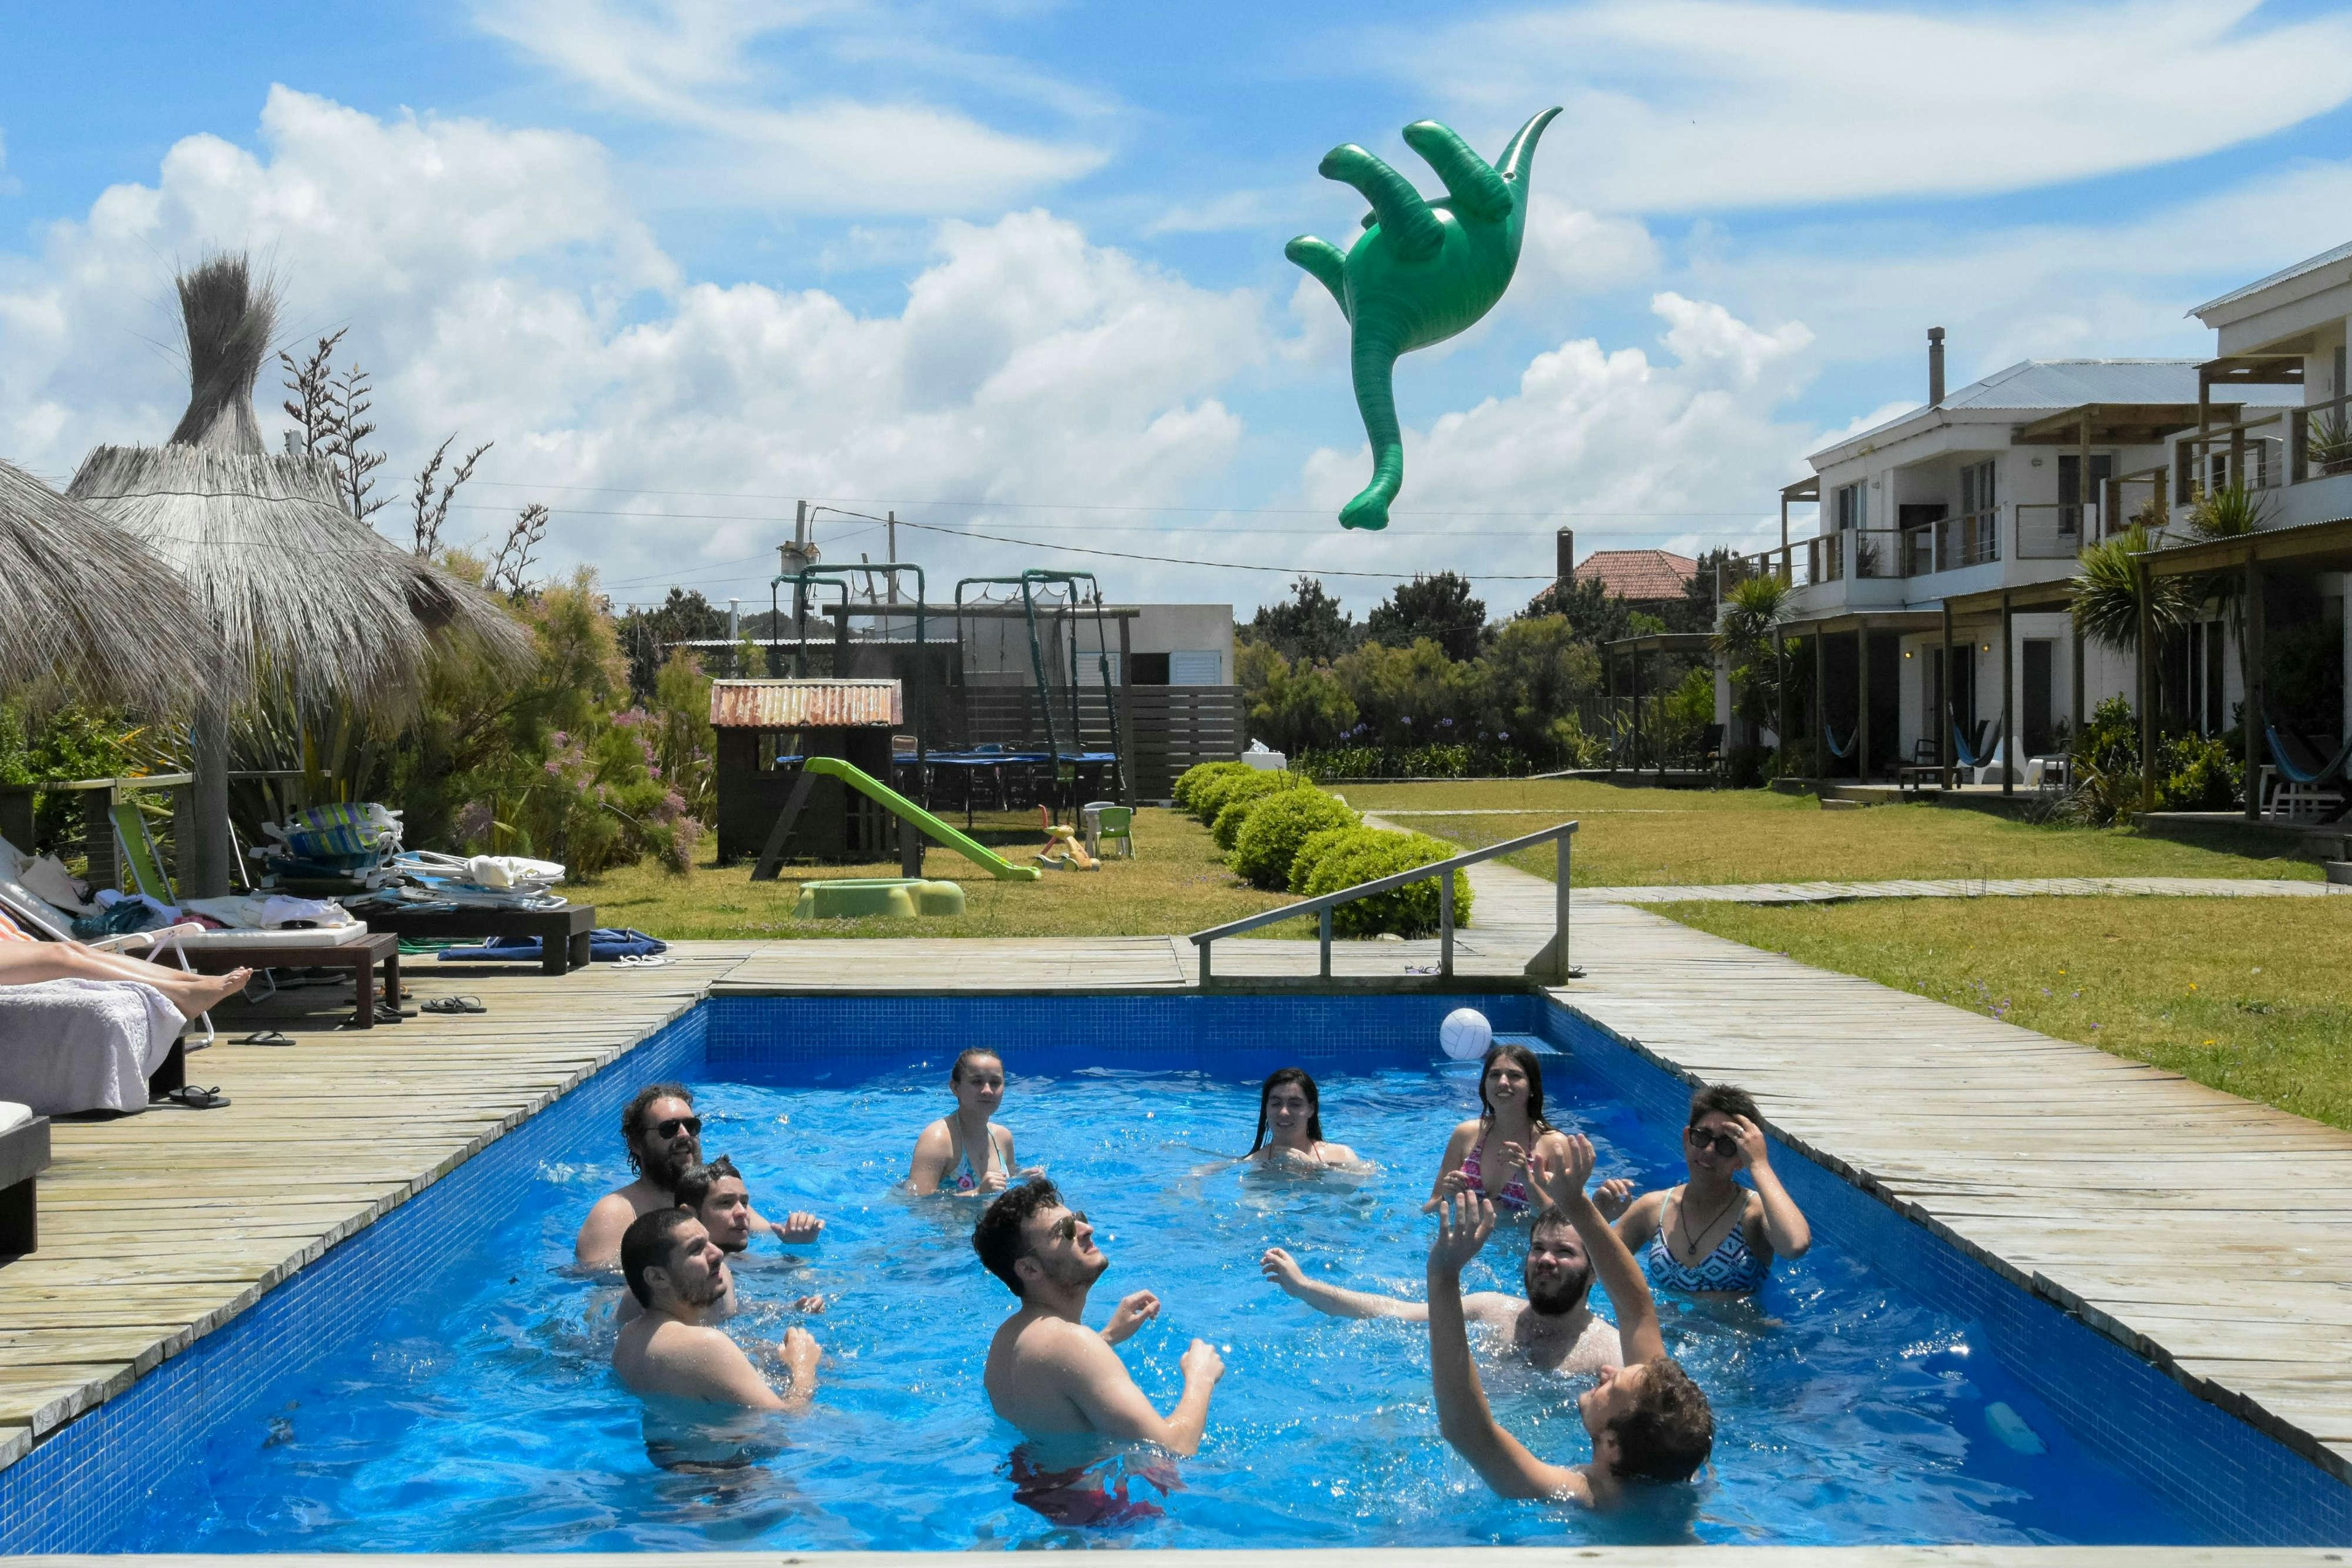 Dino water volley